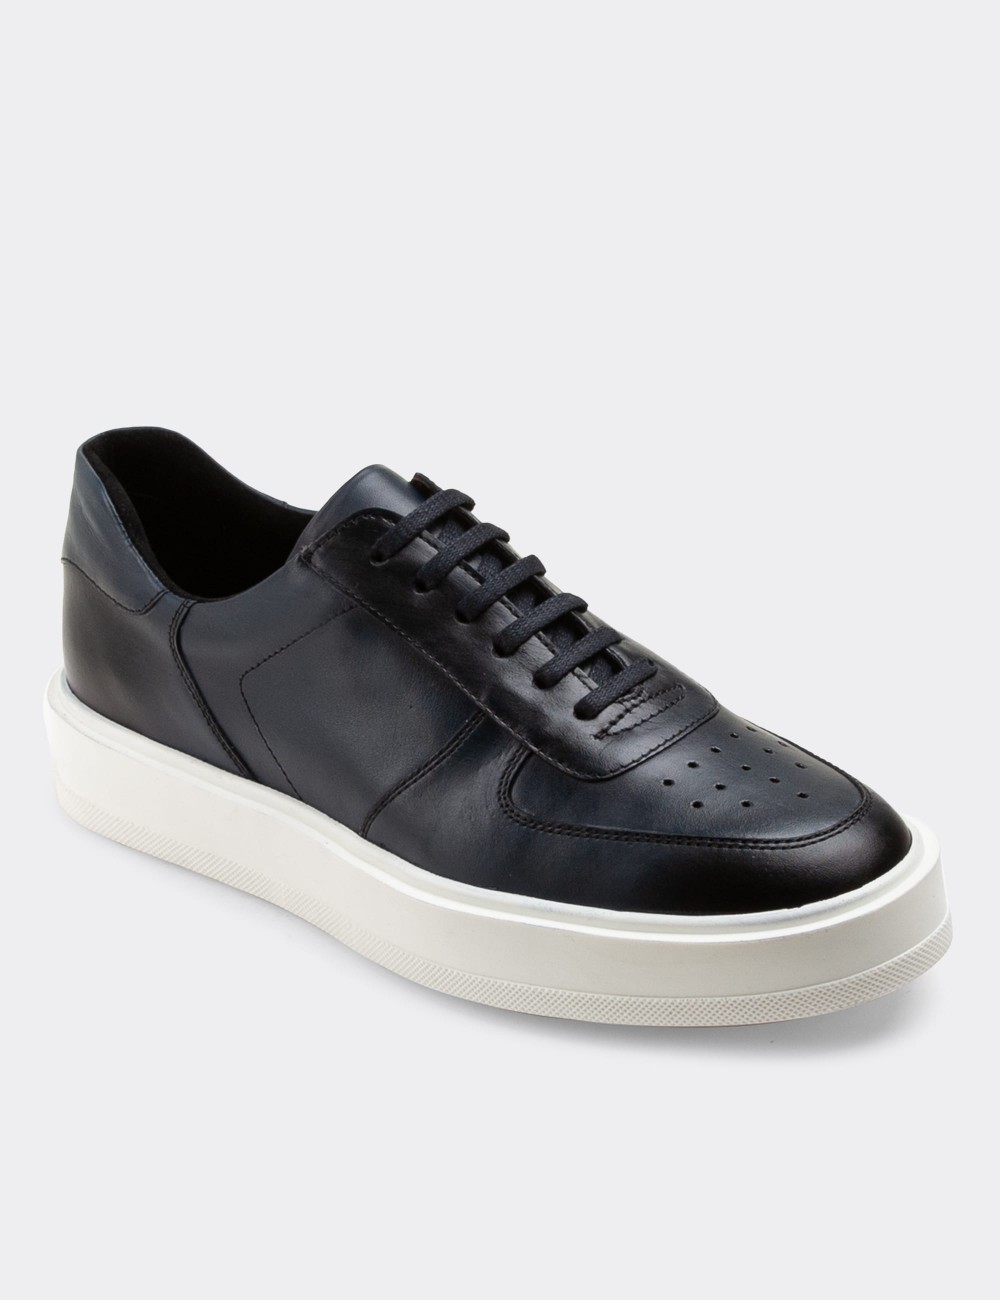 Navy  Leather Sneakers - 01880MLCVP01